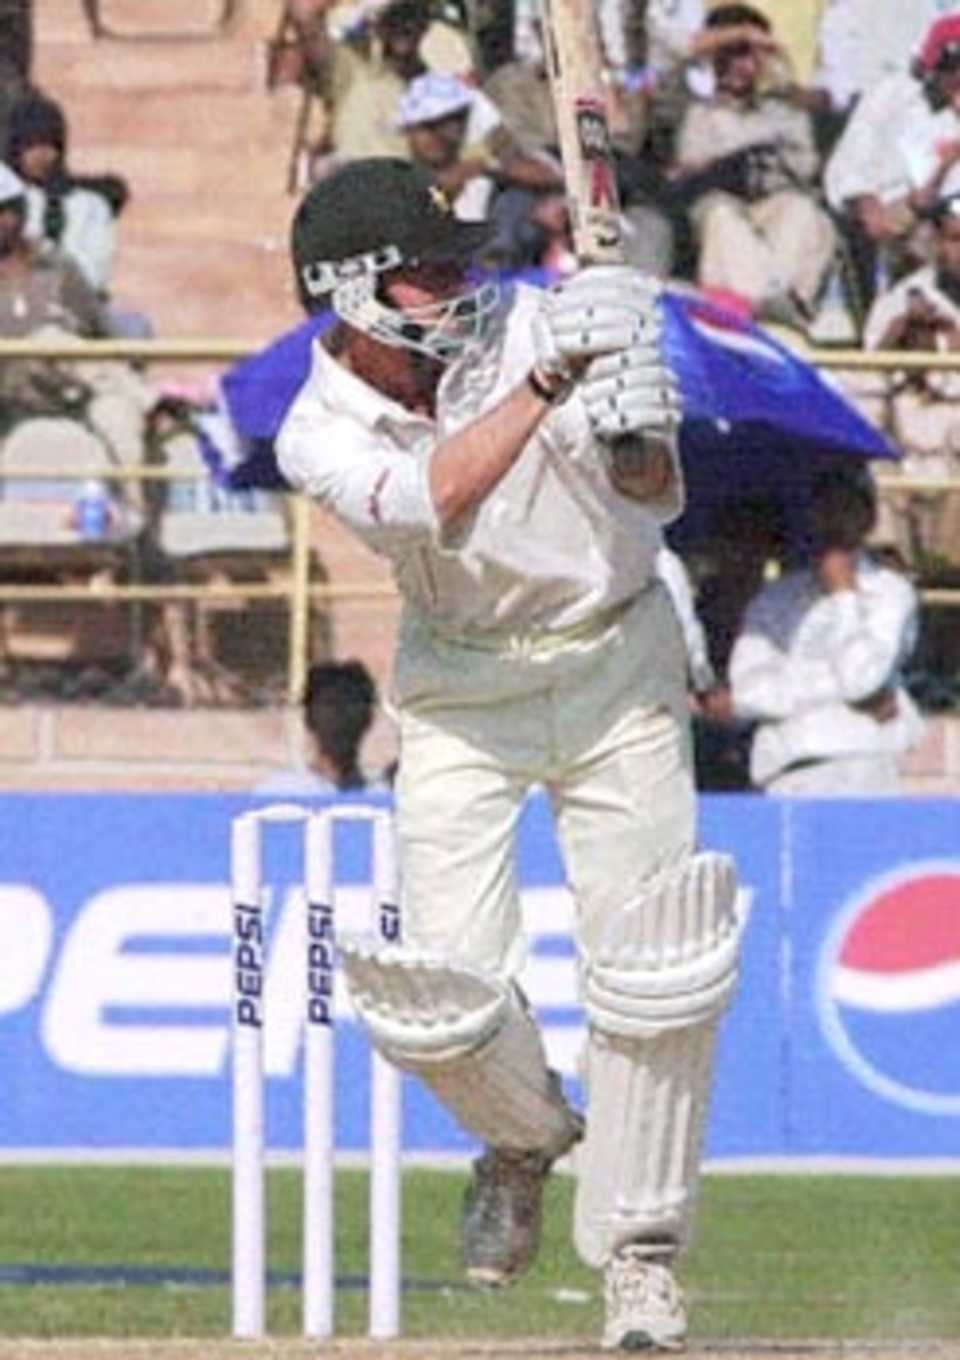 Zimbabwe batsman Grant Flower hits a ball to boundary during the third one-day cricket match in Jodhpur 08 December 2000. Flower scored 70 runs. Zimbabwe won the match by one wicket off the penultimate ball to record their fist win in the five-match series.